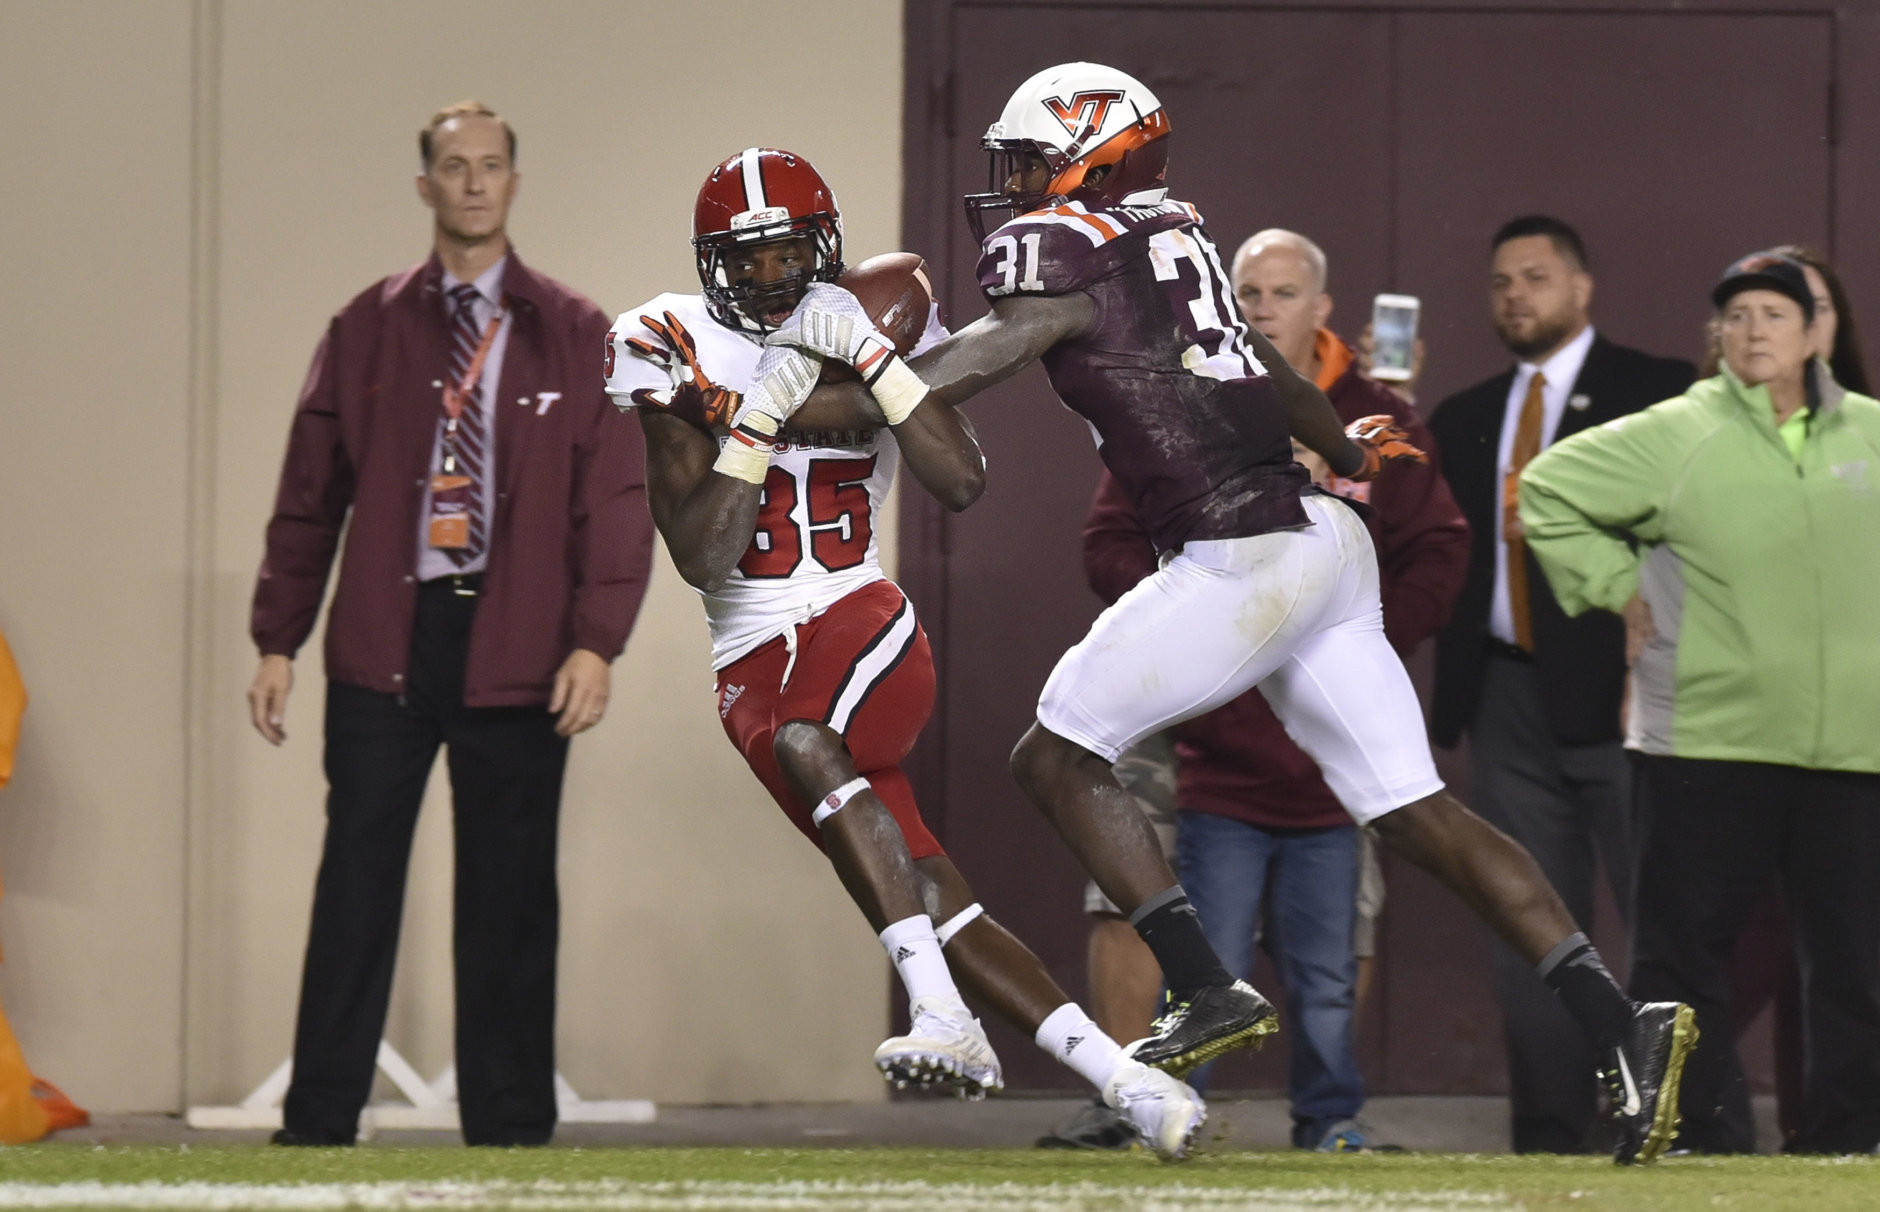 BLACKSBURG, VA - OCTOBER 9: Cornerback Brandon Facyson #31 of the Virginia Tech Hokies deflects a pass intended for wide receiver Jumichael Ramos #85 of the North Carolina State Wolfpack in the second half at Lane Stadium on October 9, 2015 in Blacksburg, Virginia. Virginia Tech defeated North Carolina State 28-13. (Photo by Michael Shroyer/Getty Images)